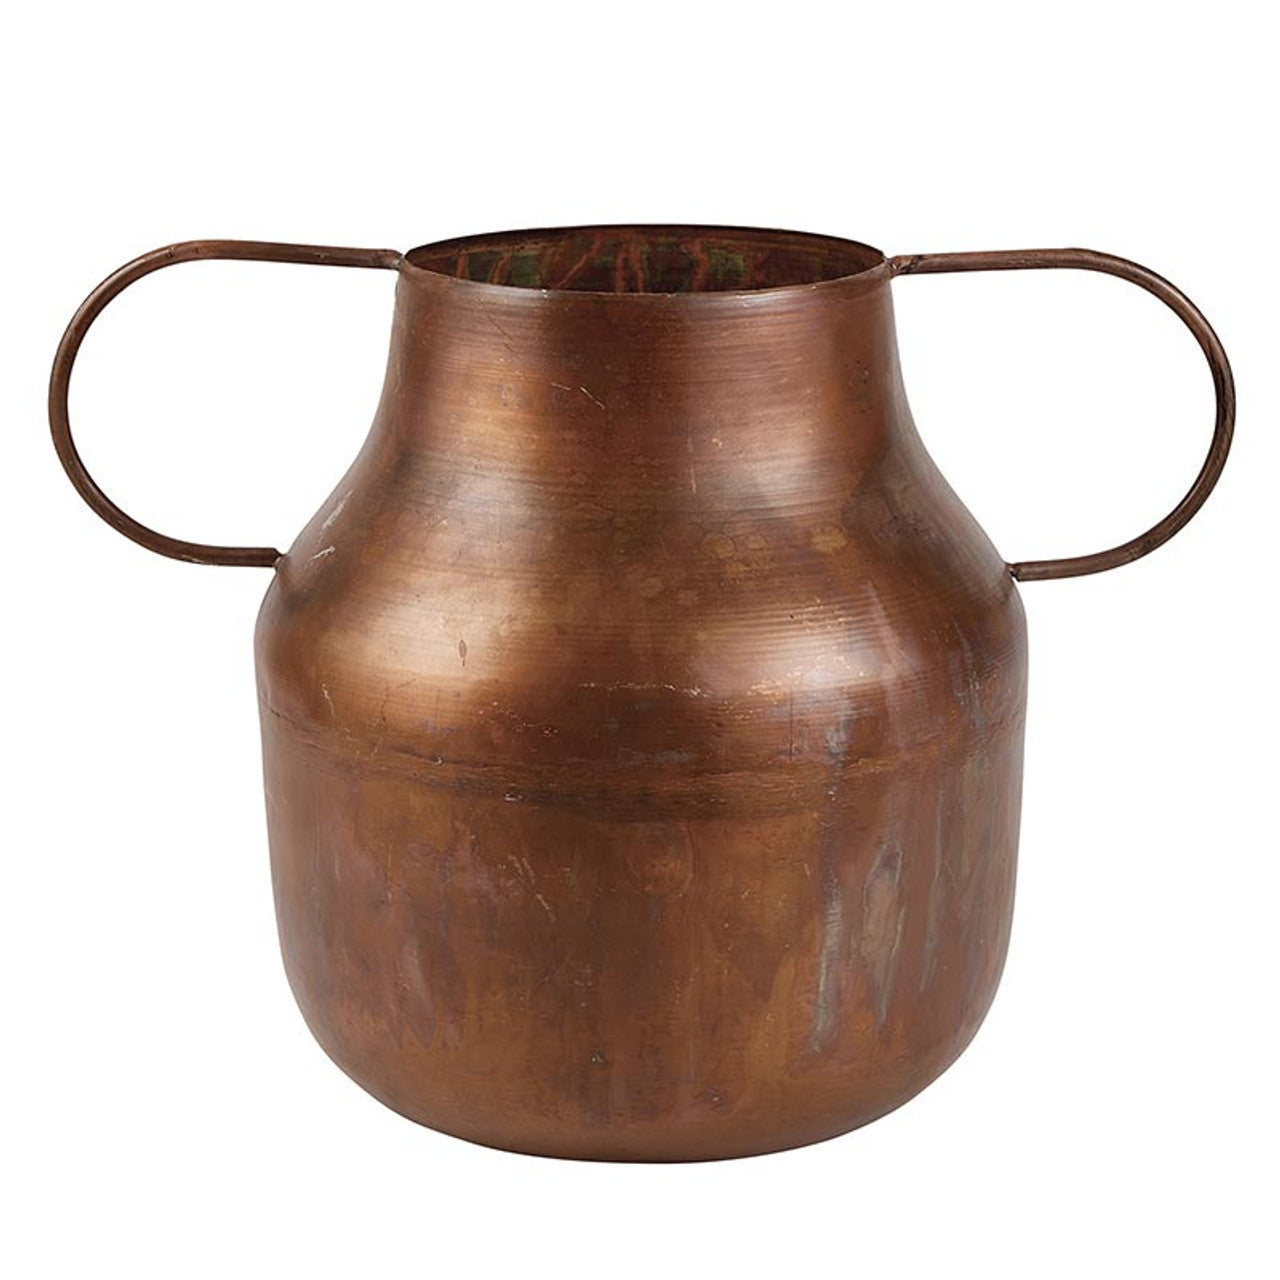 Copper Vase with Handles - Large